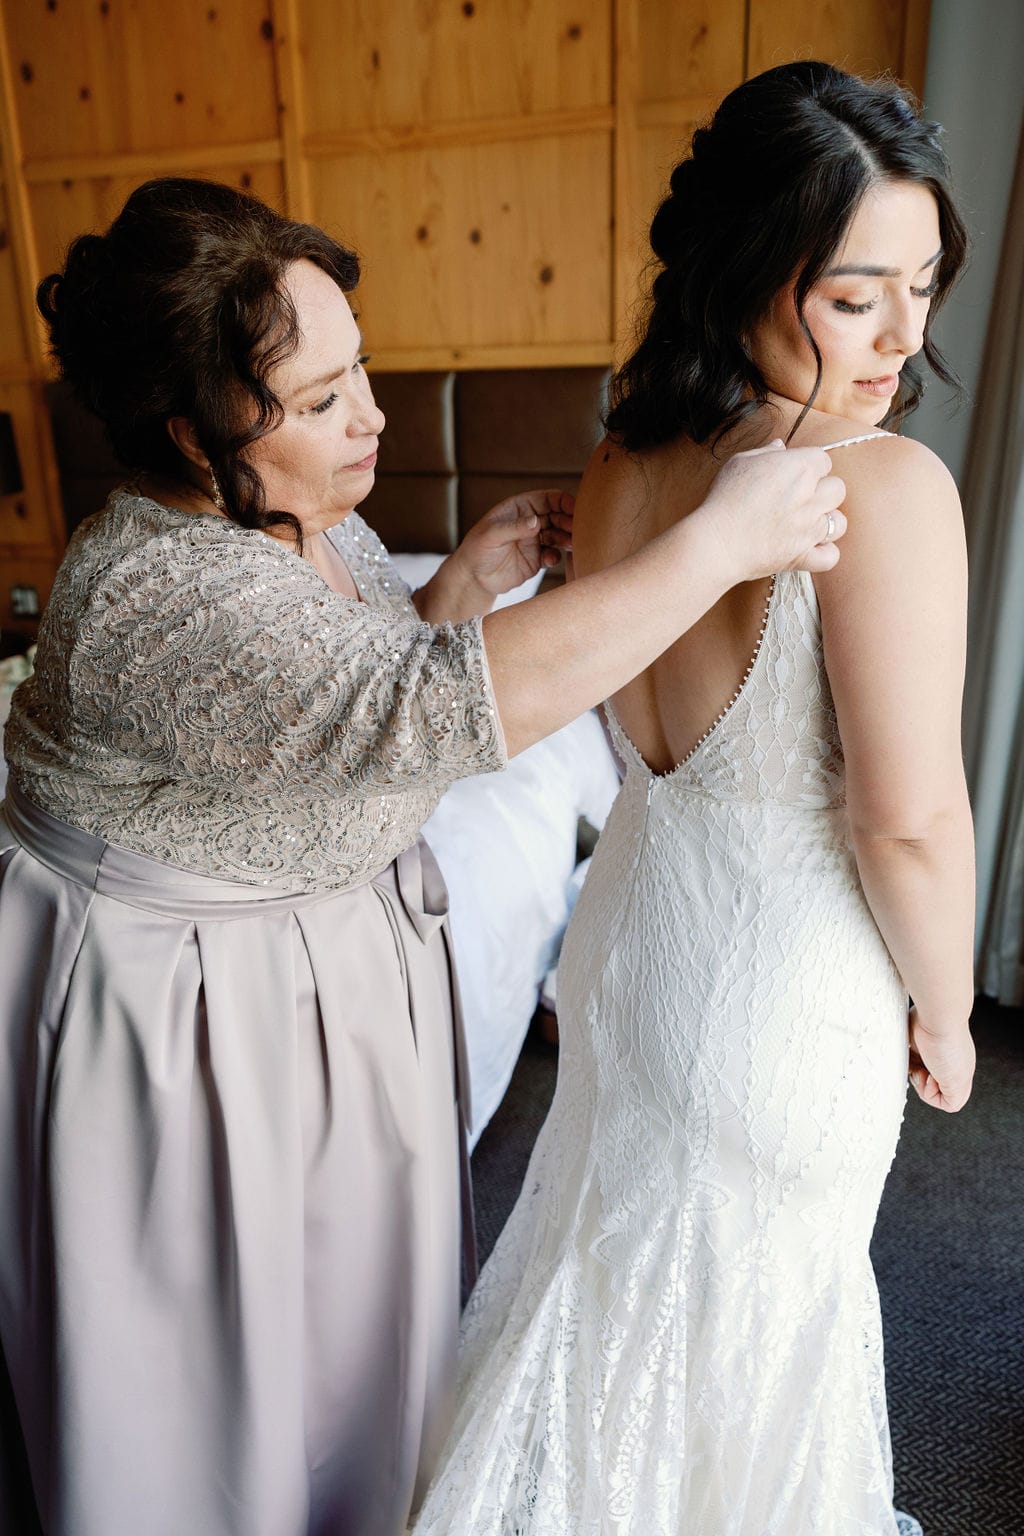 Bride puts her dress on with the help of her mom while getting ready for her wedding day in denver colorado